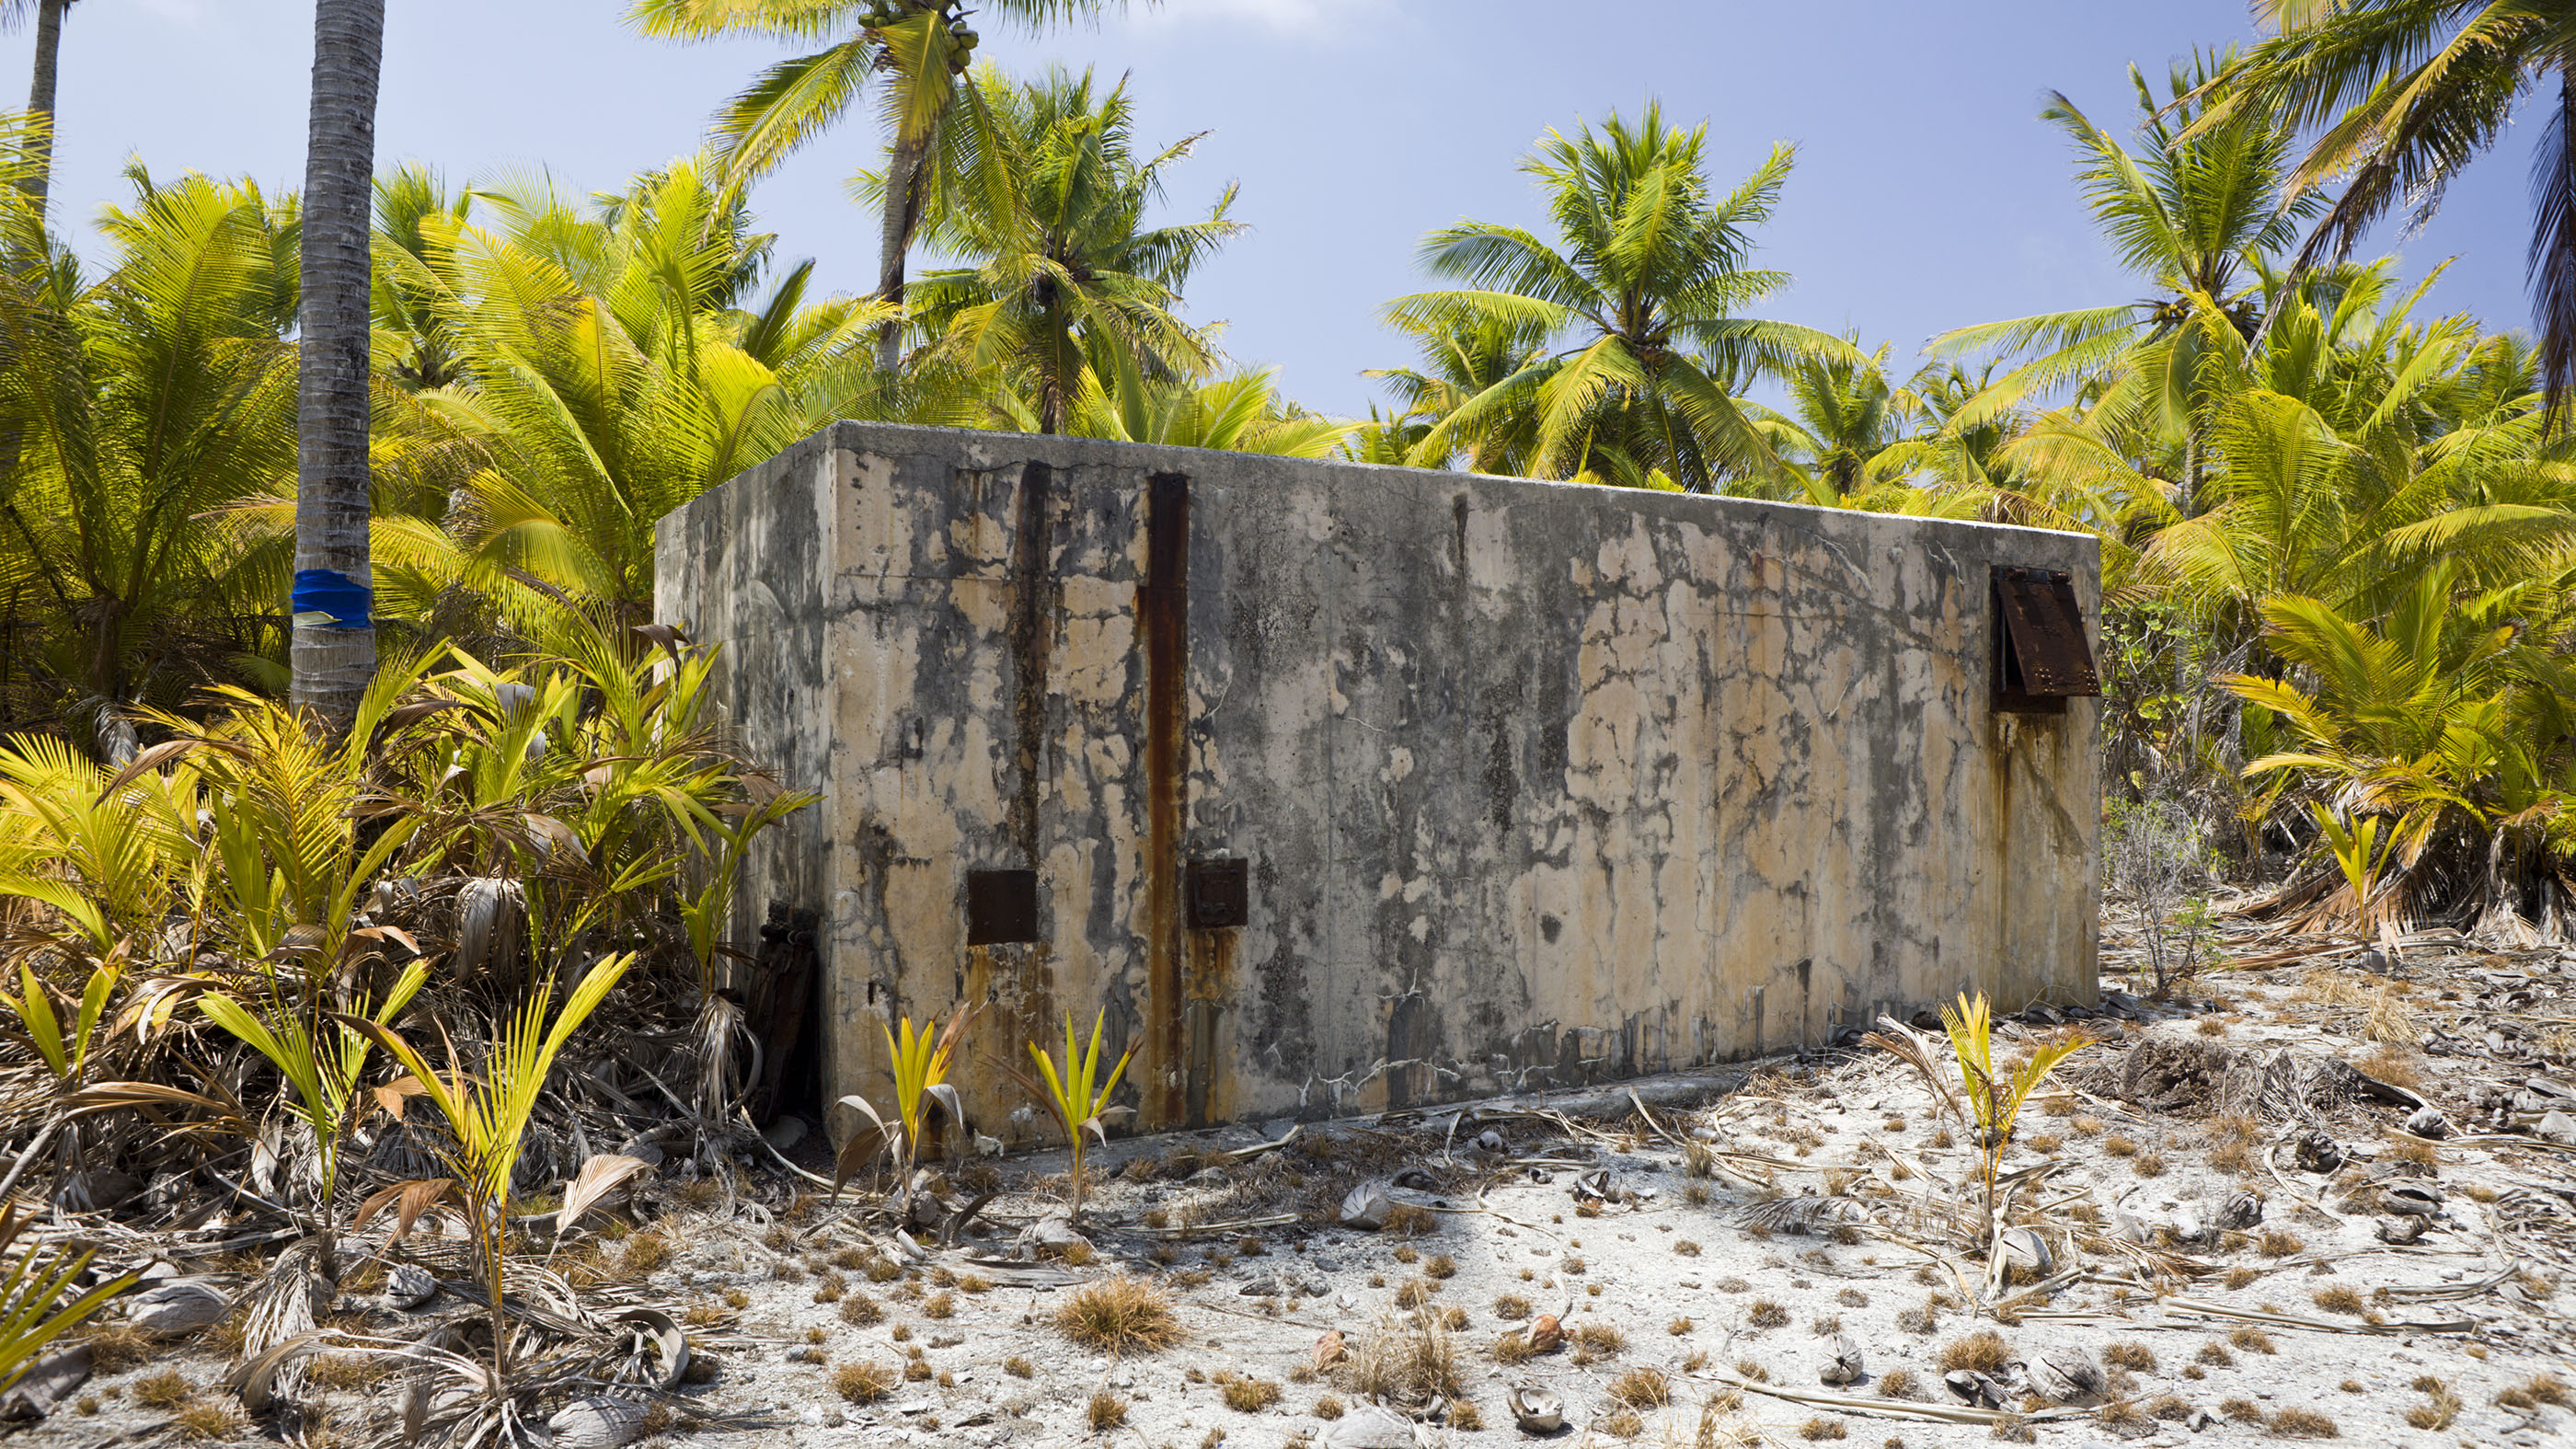 Old bunker built for the observation of nuclear weapons tests, Marshall Islands, Bikini Atoll, Micronesia, Pacific Ocean.